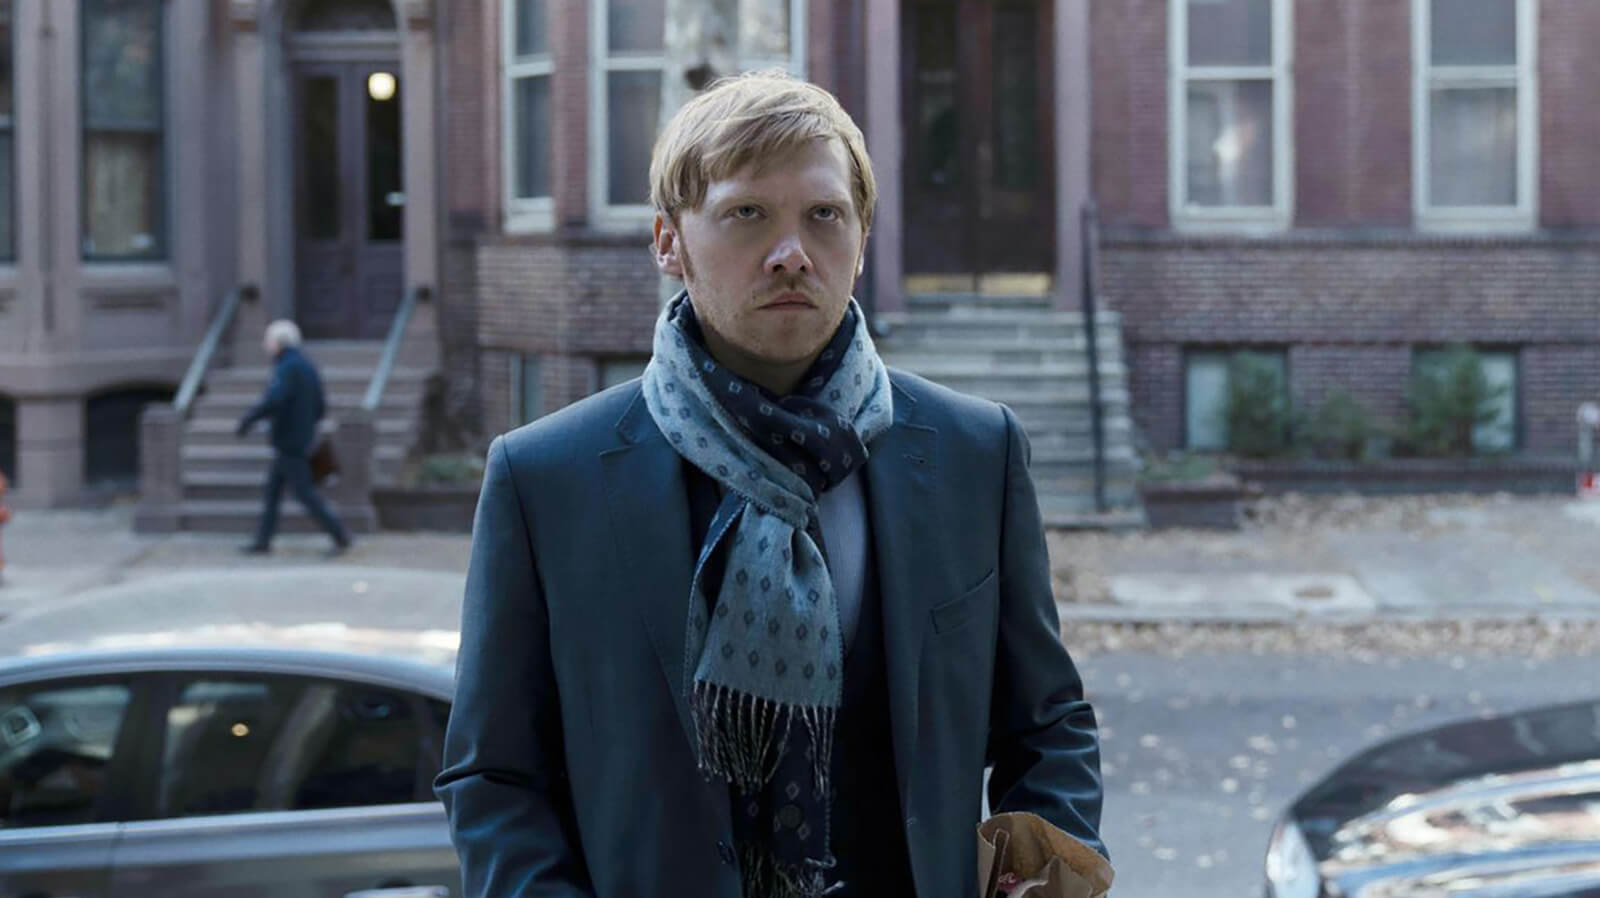 Servant star Rupert Grint to star in Knock at the Cabin by M. Night Shyamalan